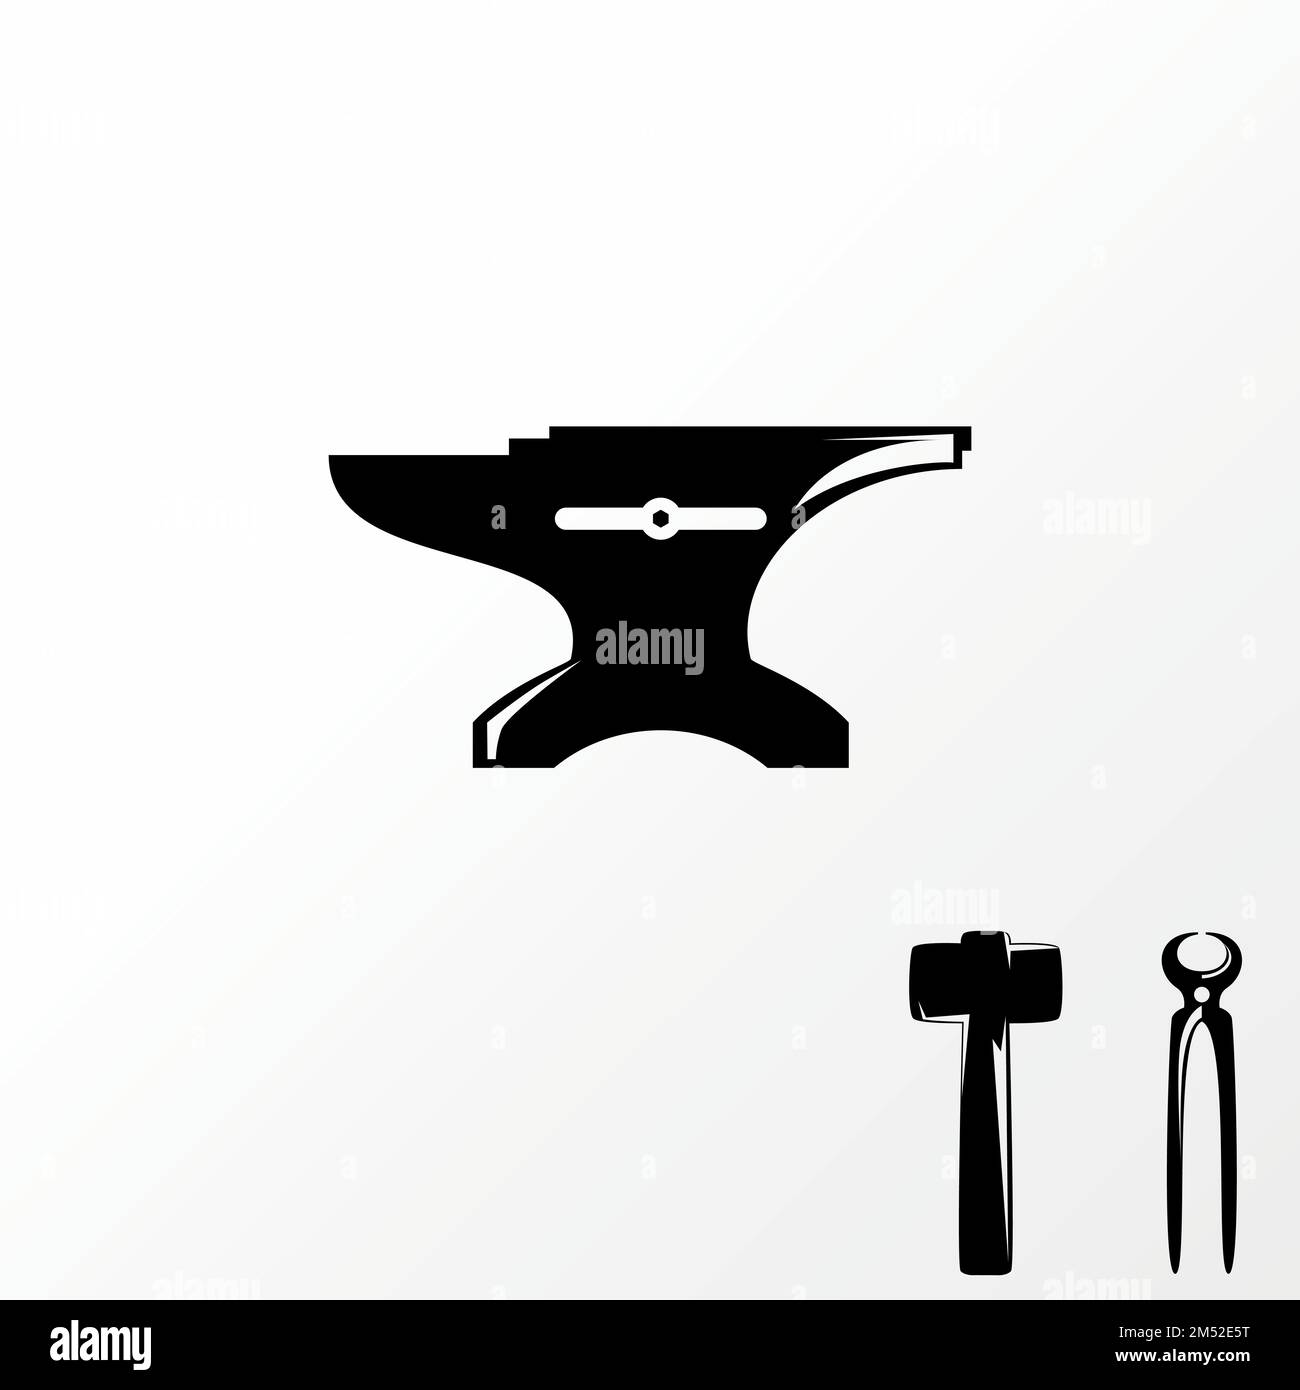 Simple blacksmith equipment that has a unique character image graphic icon logo design abstract concept vector stock. symbol related to workshop. Stock Vector